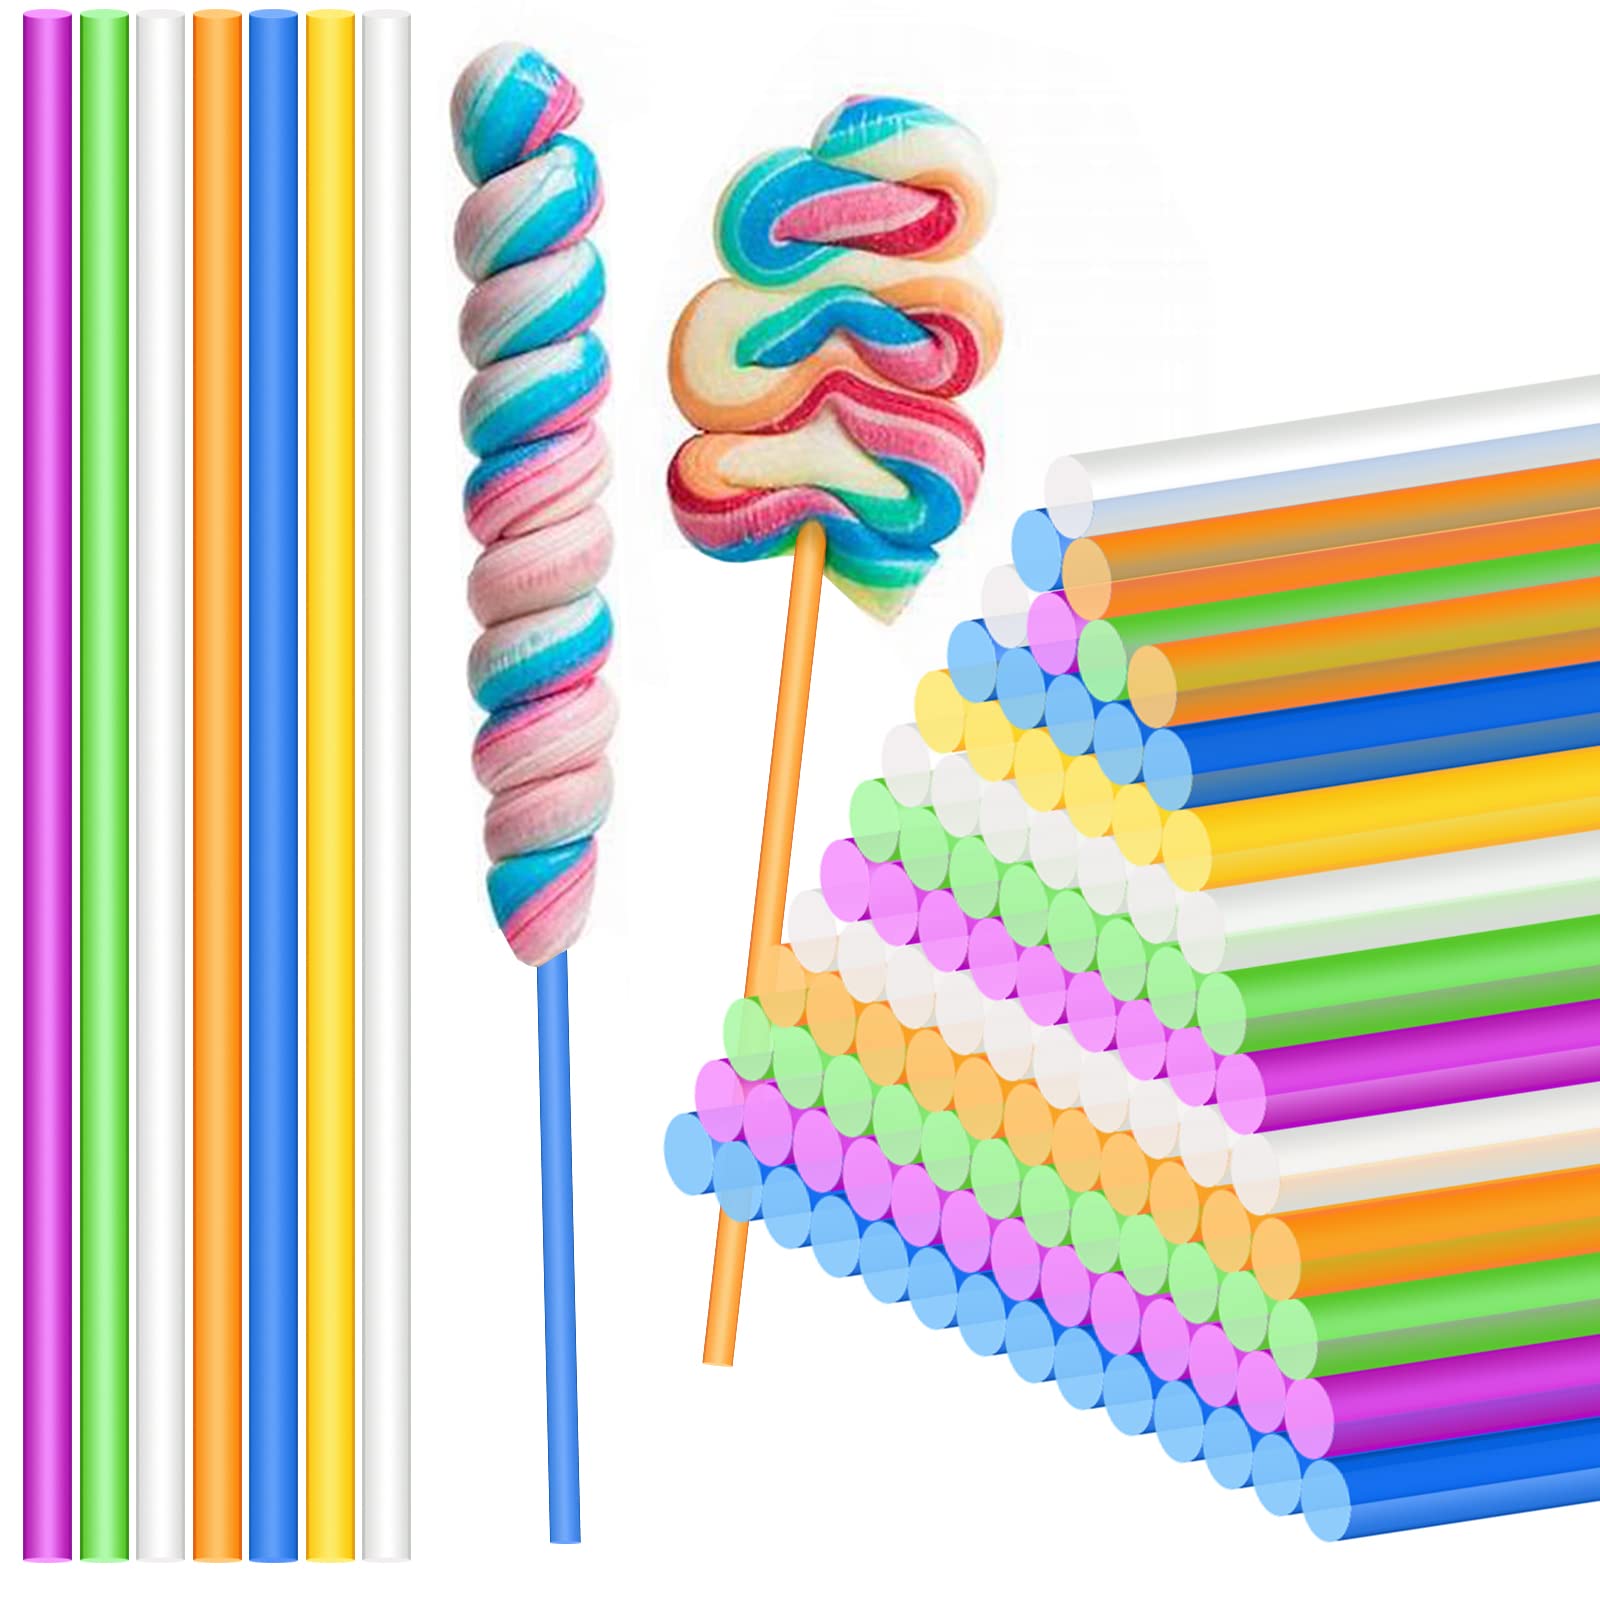 Kamehame 30 Pieces Acrylic Rods 12.2 Inch Acrylic Dowel Rods Round Cake Topper Rod Cake Pop Sticks Acrylic Strip Sticks for DIY Crafts Handwork Supplies Candy Dessert(6 Colors,5 for Each Color)